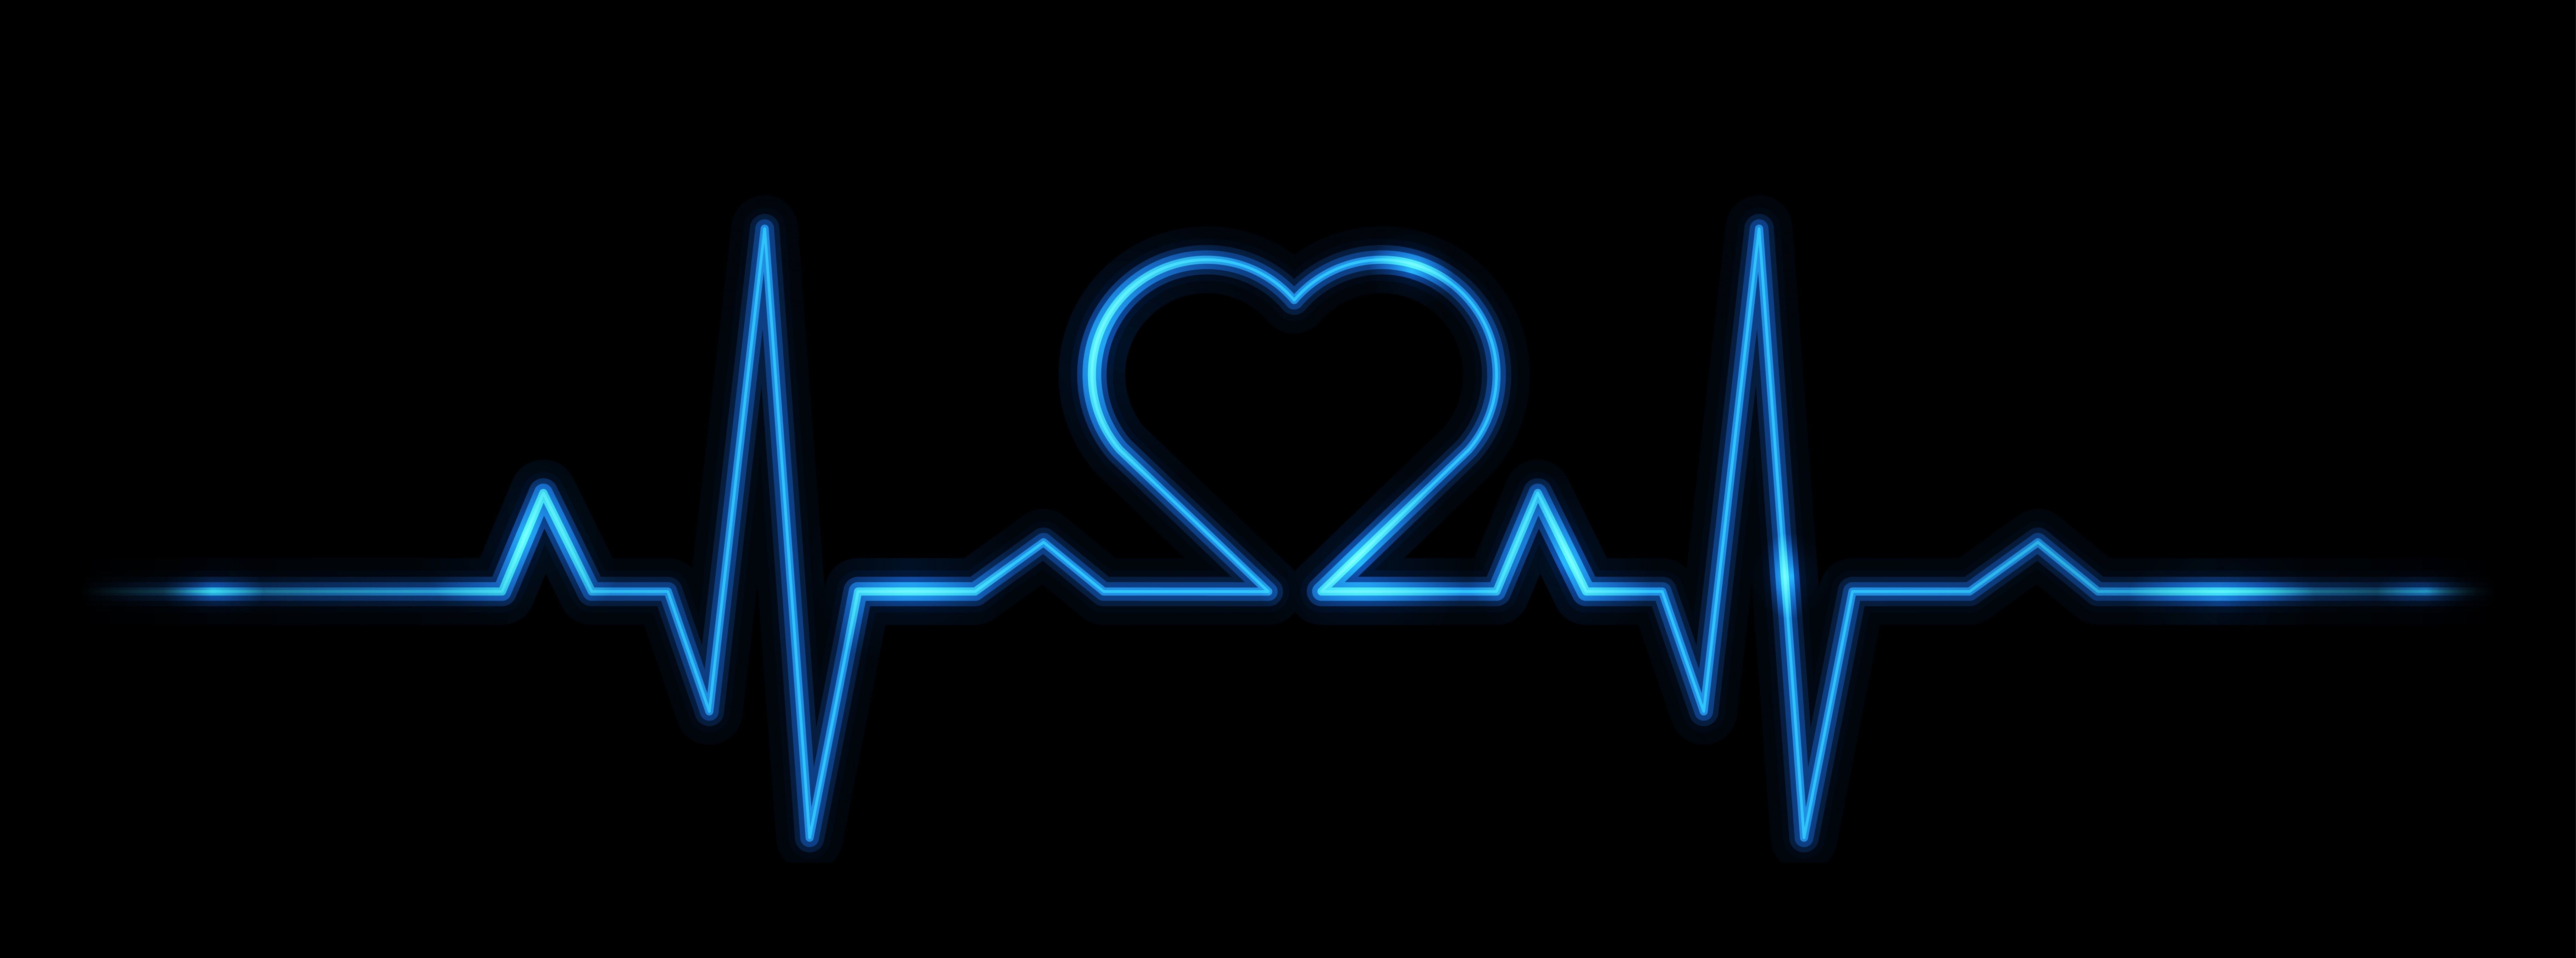 Neon Glowing Lines Heartbeat Concept Stock Vector  Illustration of care  wallpaper 142518162